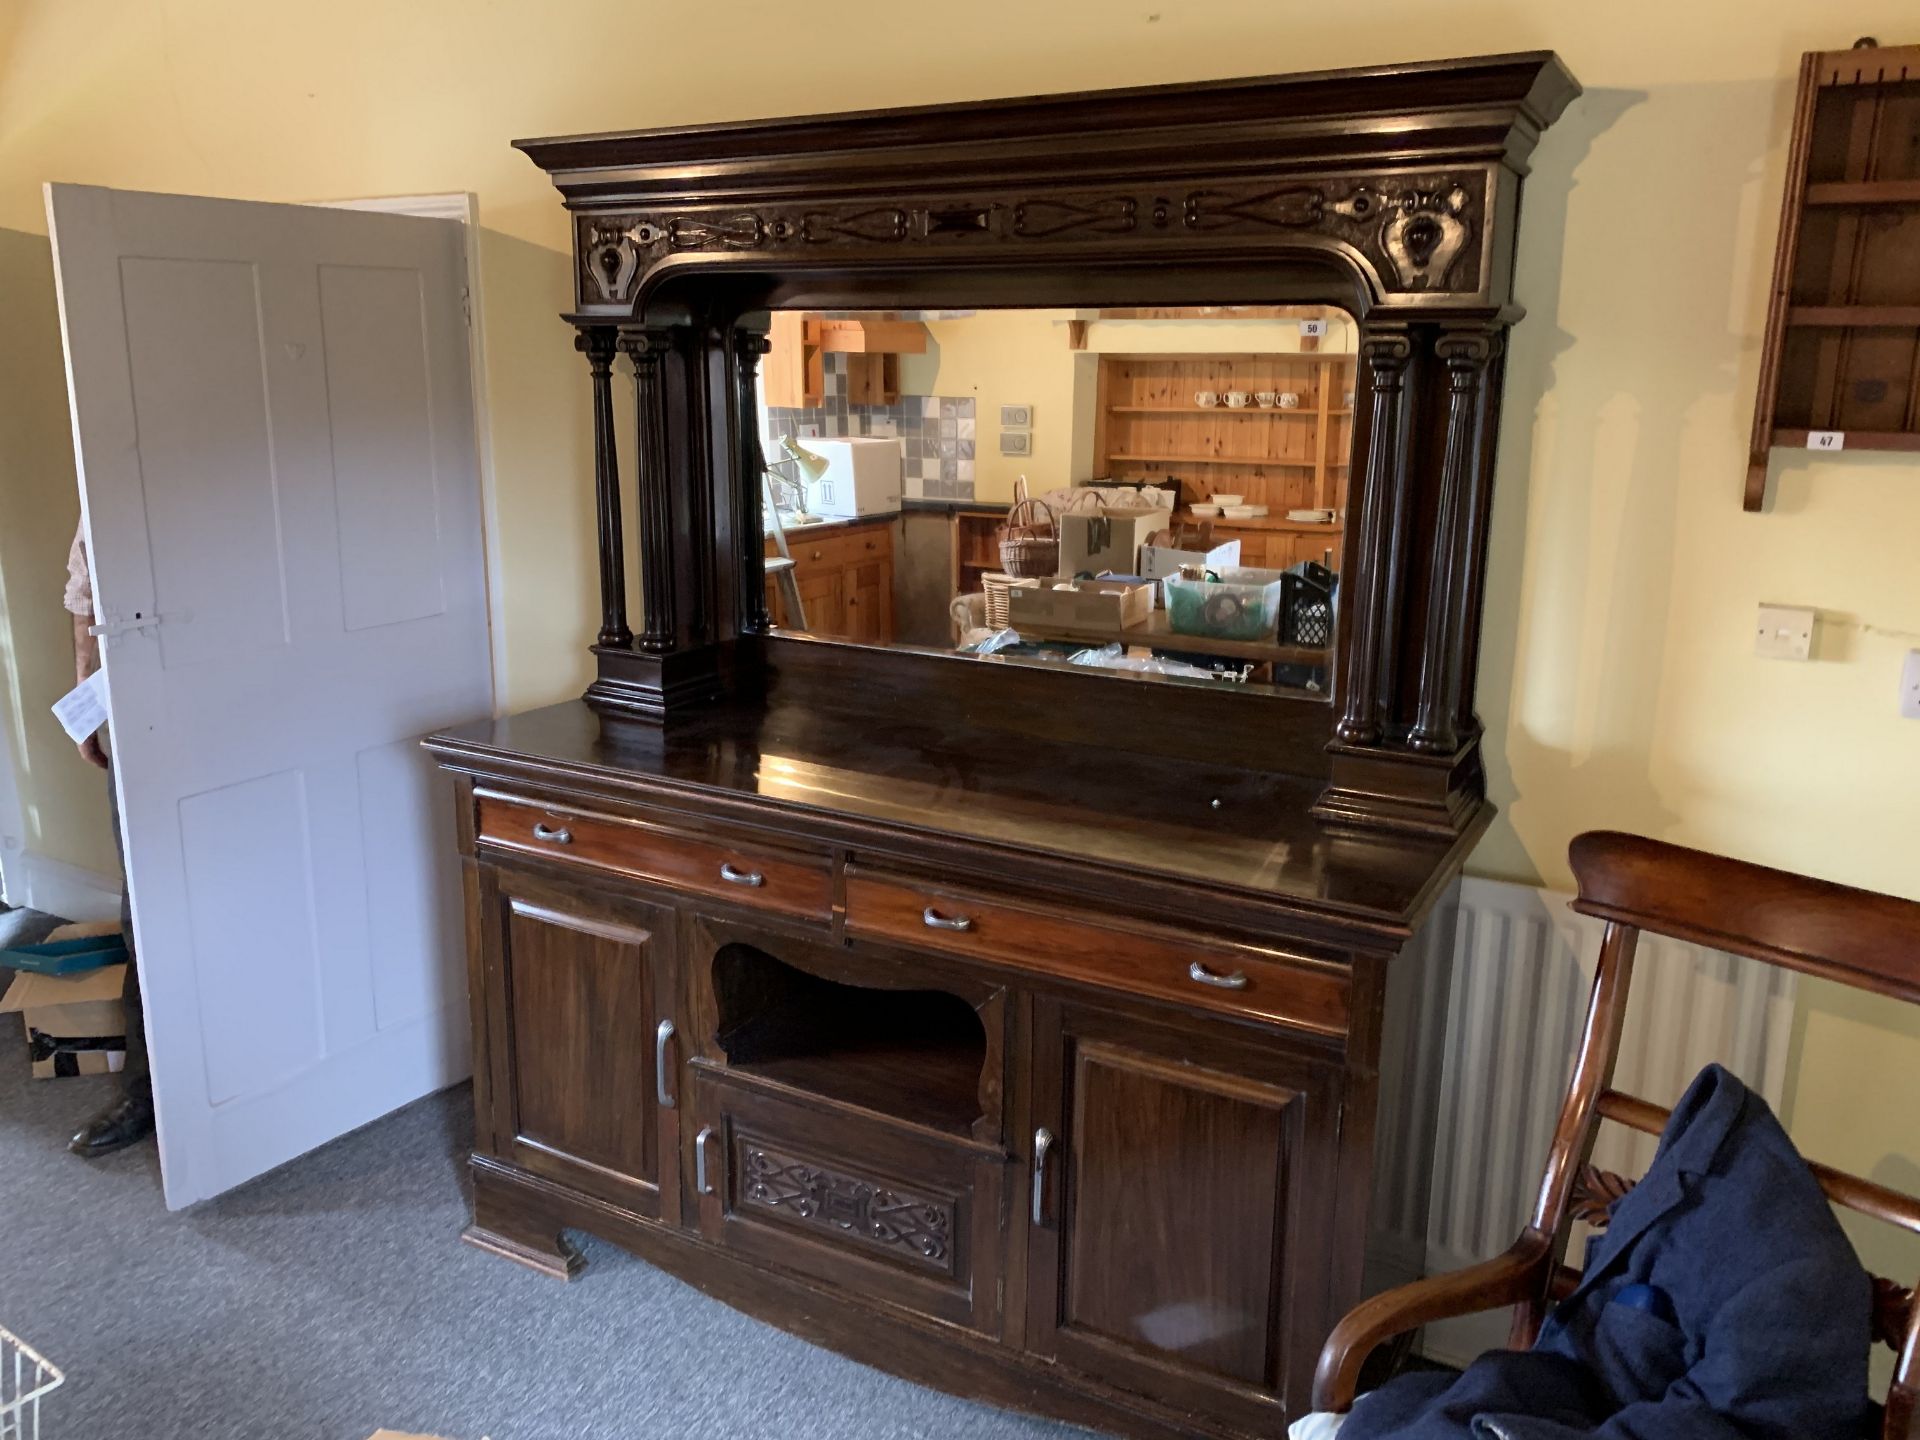 Large mirror backed sideboard